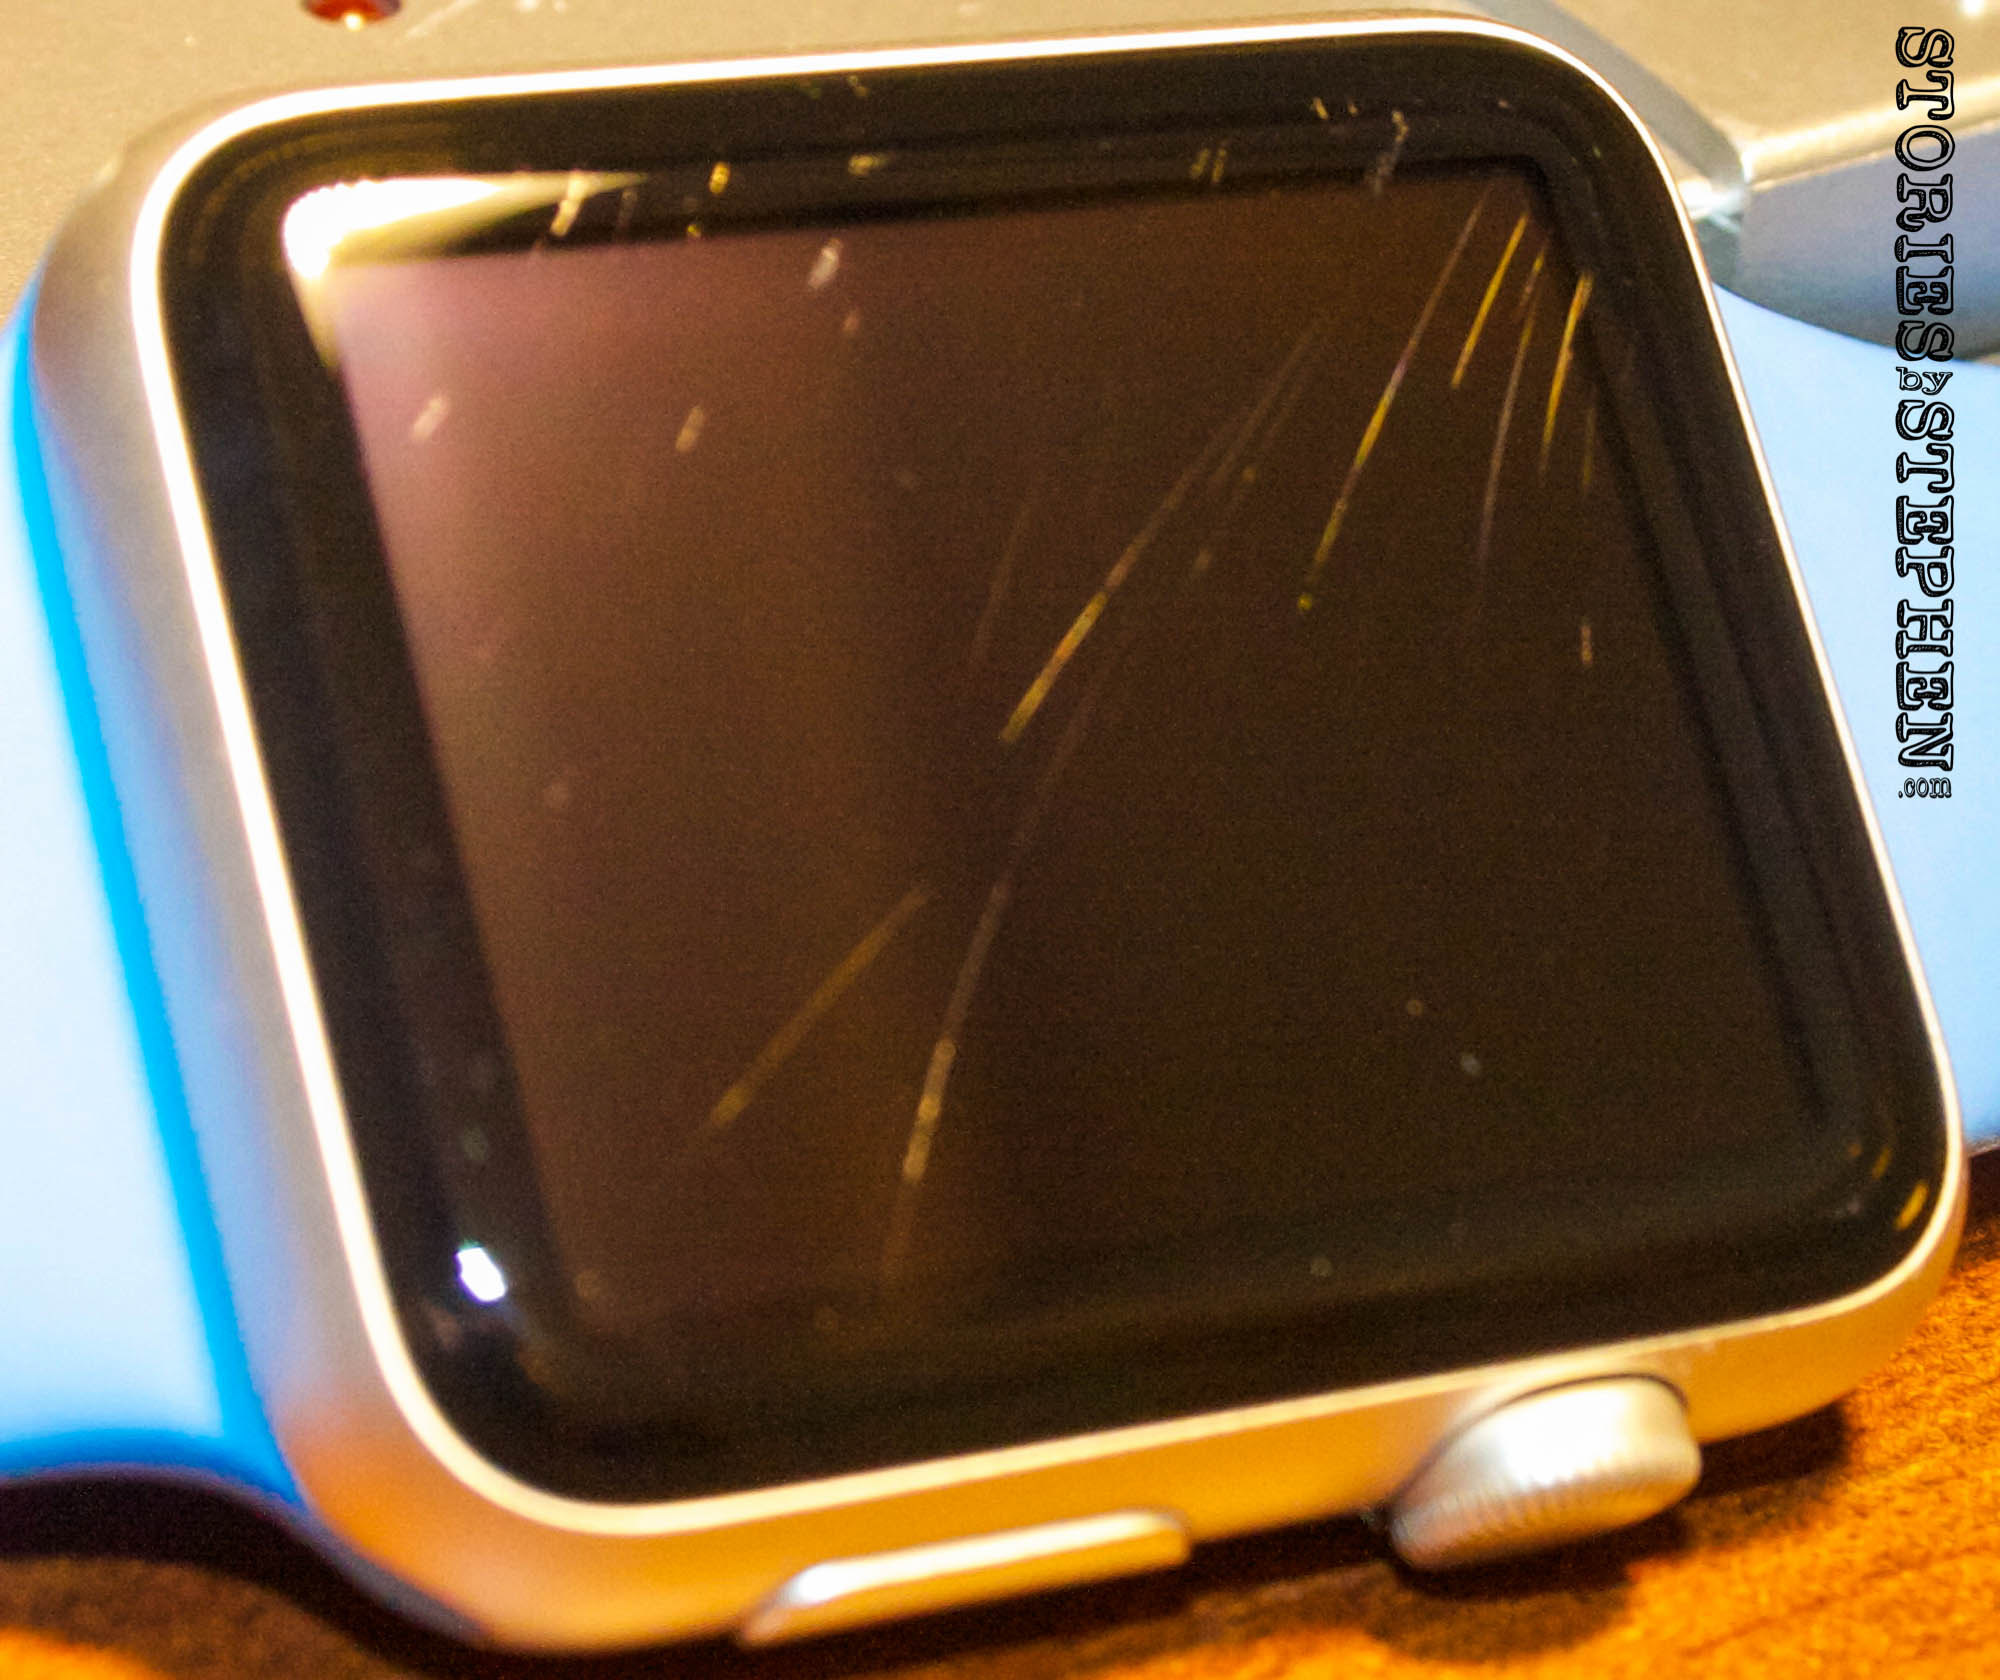 My Scratched-Up Apple Watch Screen & Apple's Refusal to Help